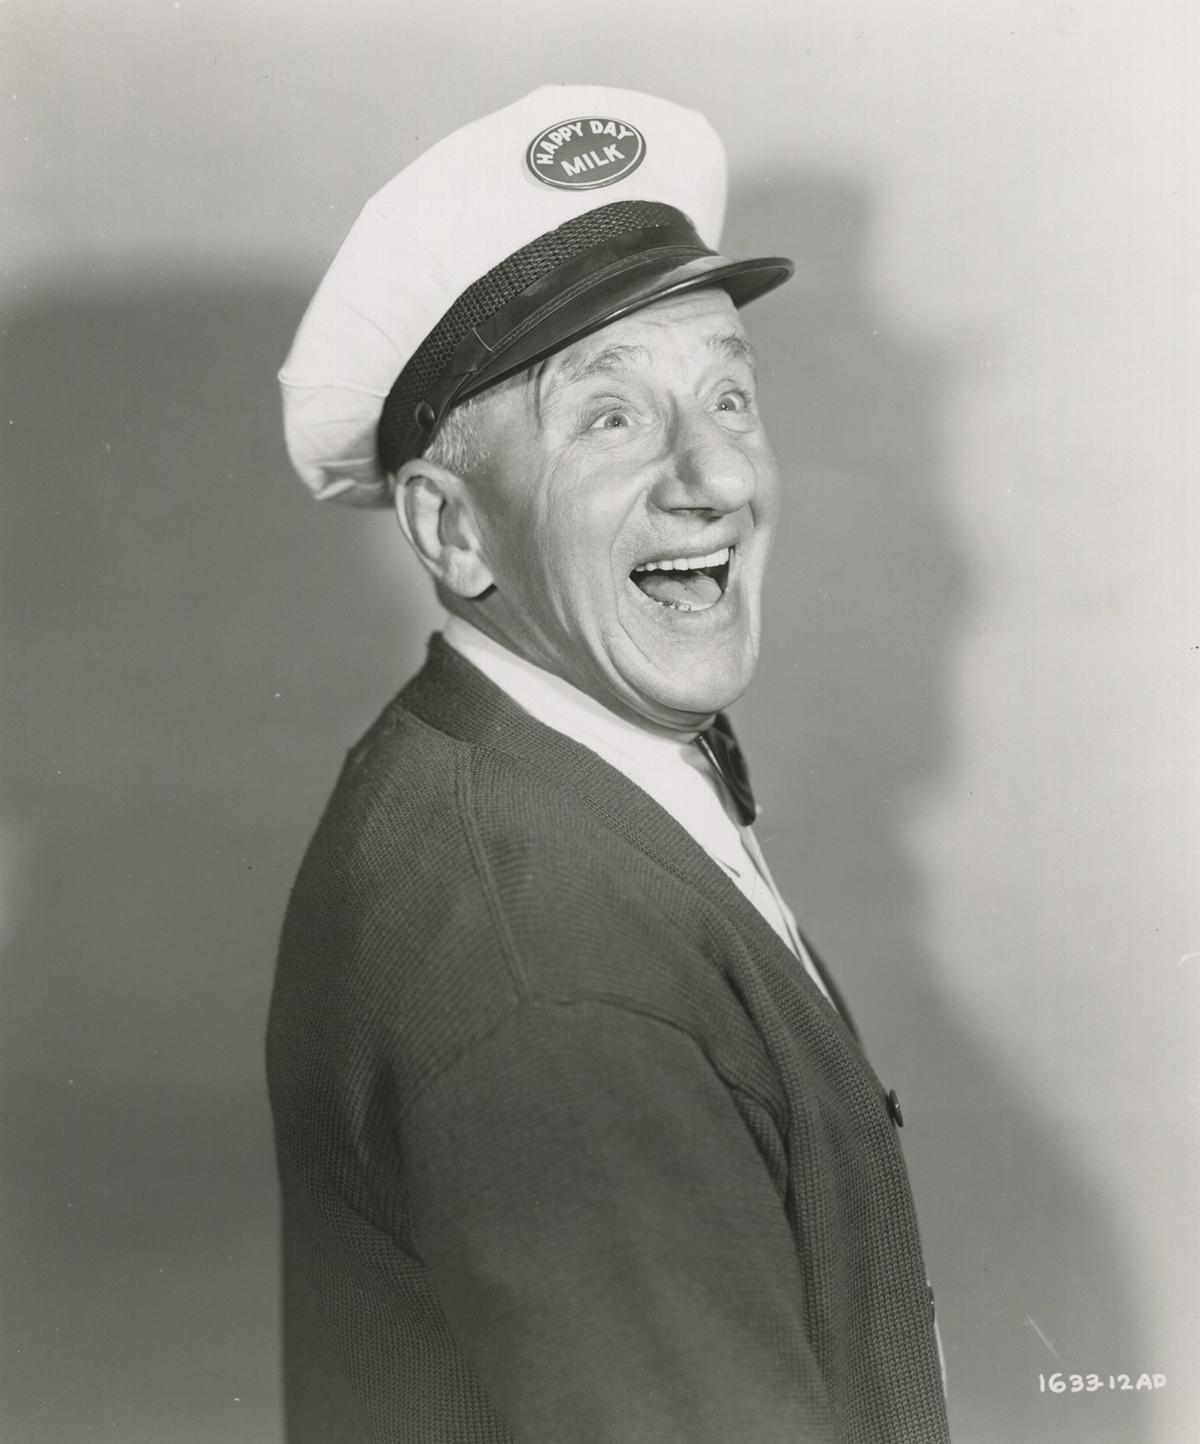 Jimmy Durante in the 1950 film "The Milkman." Universal Pictures Company. (Public Domain)